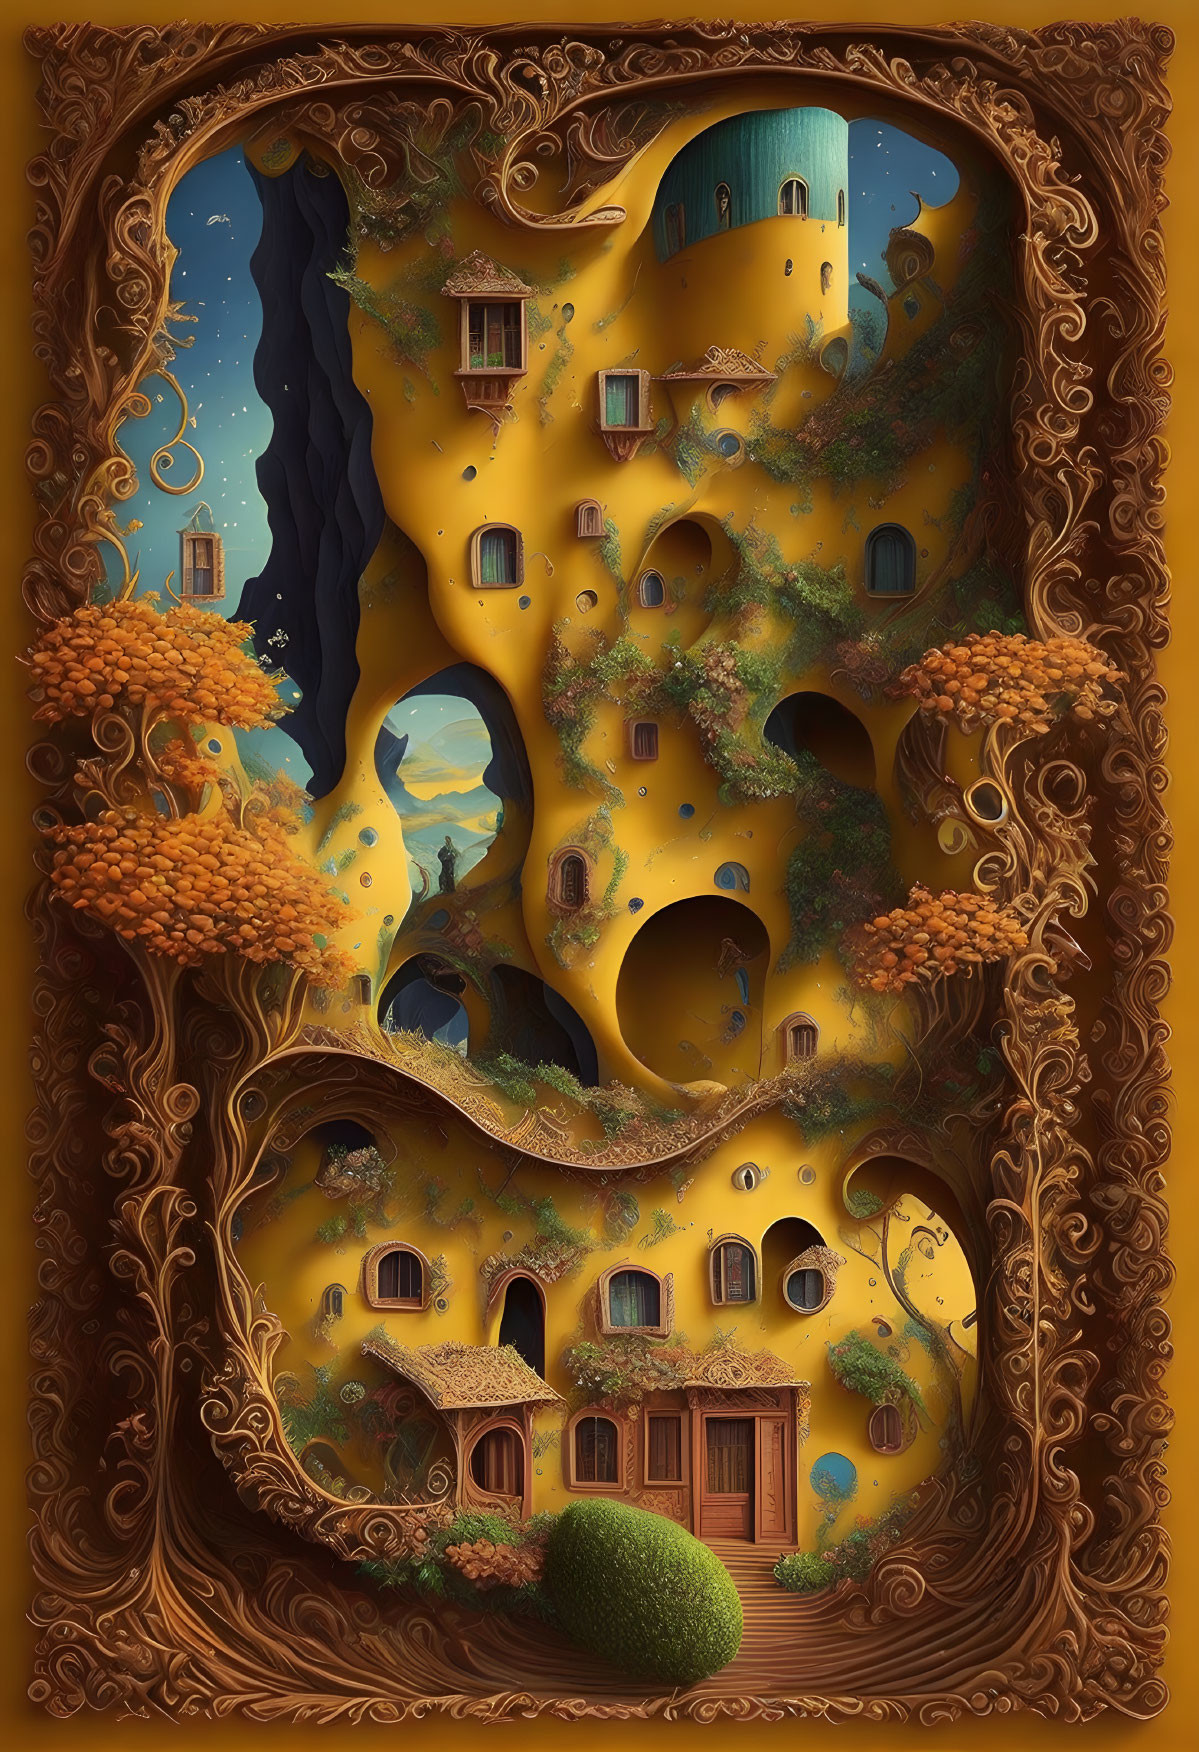 Detailed fantasy illustration: Golden landscape with surreal houses and starry night sky.